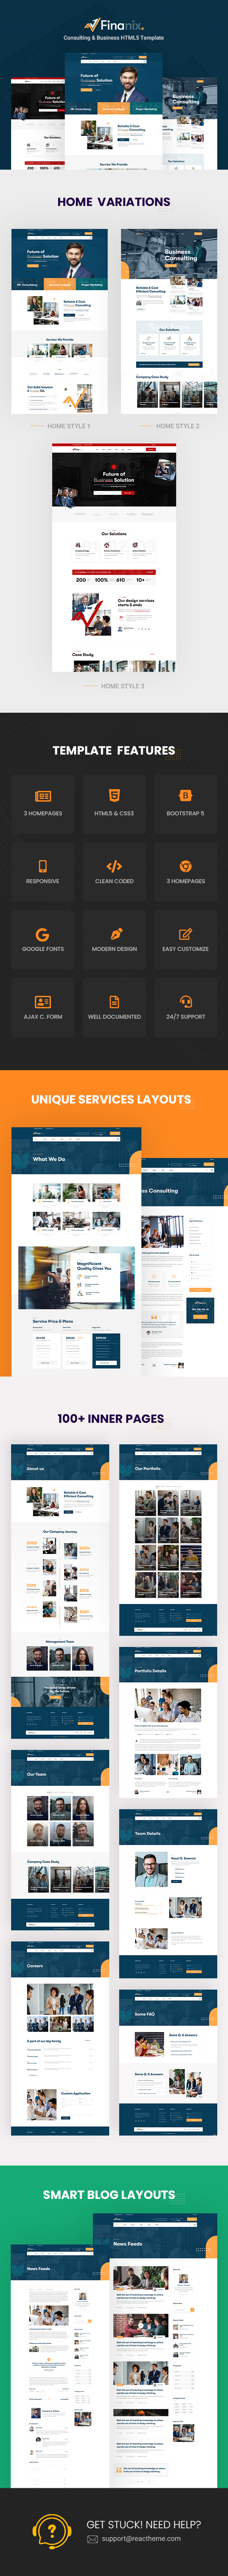 Finanix - Consulting & Business HTML5 Template - 2